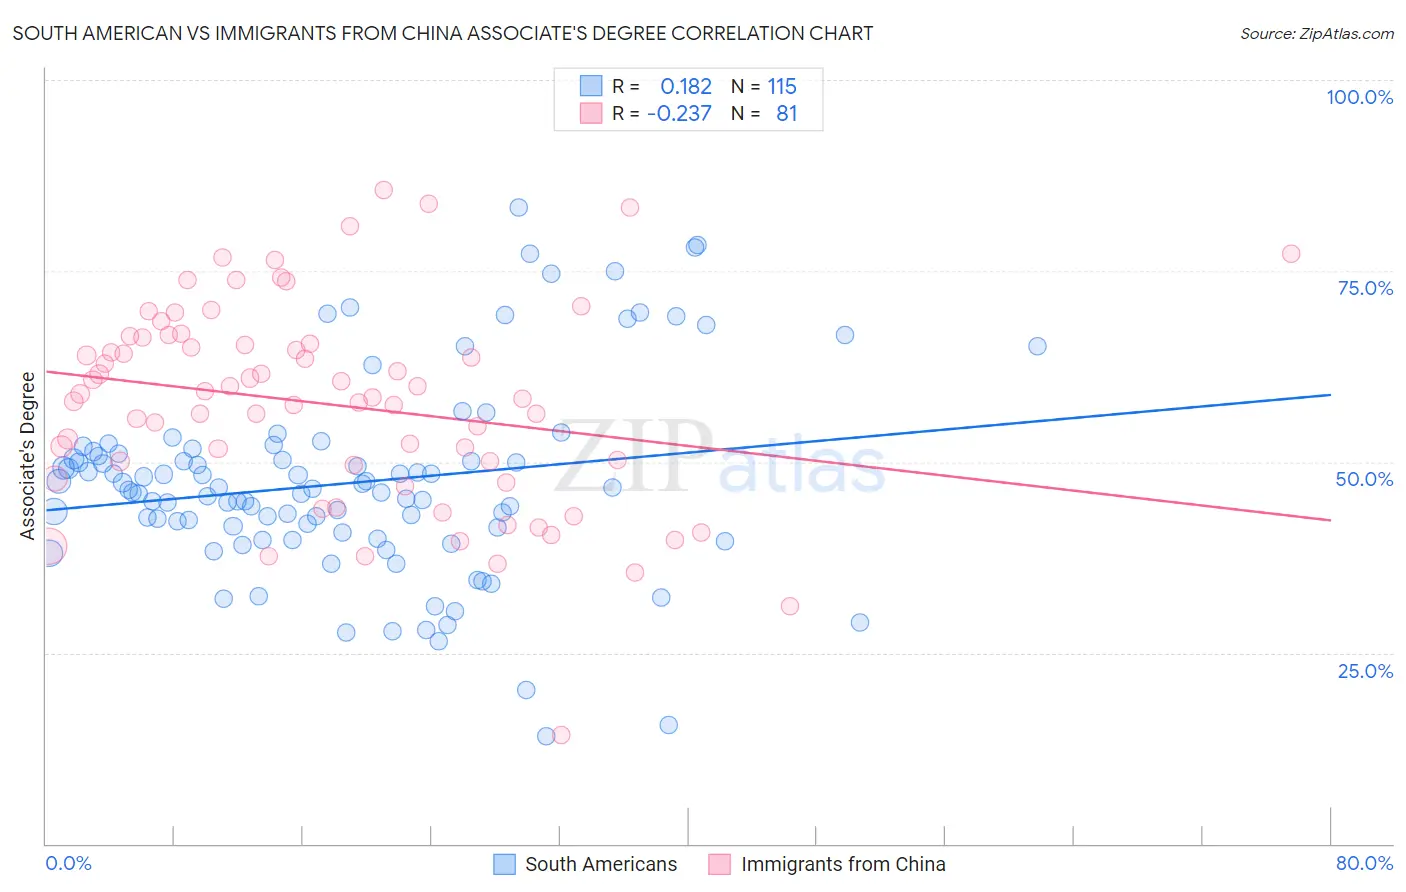 South American vs Immigrants from China Associate's Degree